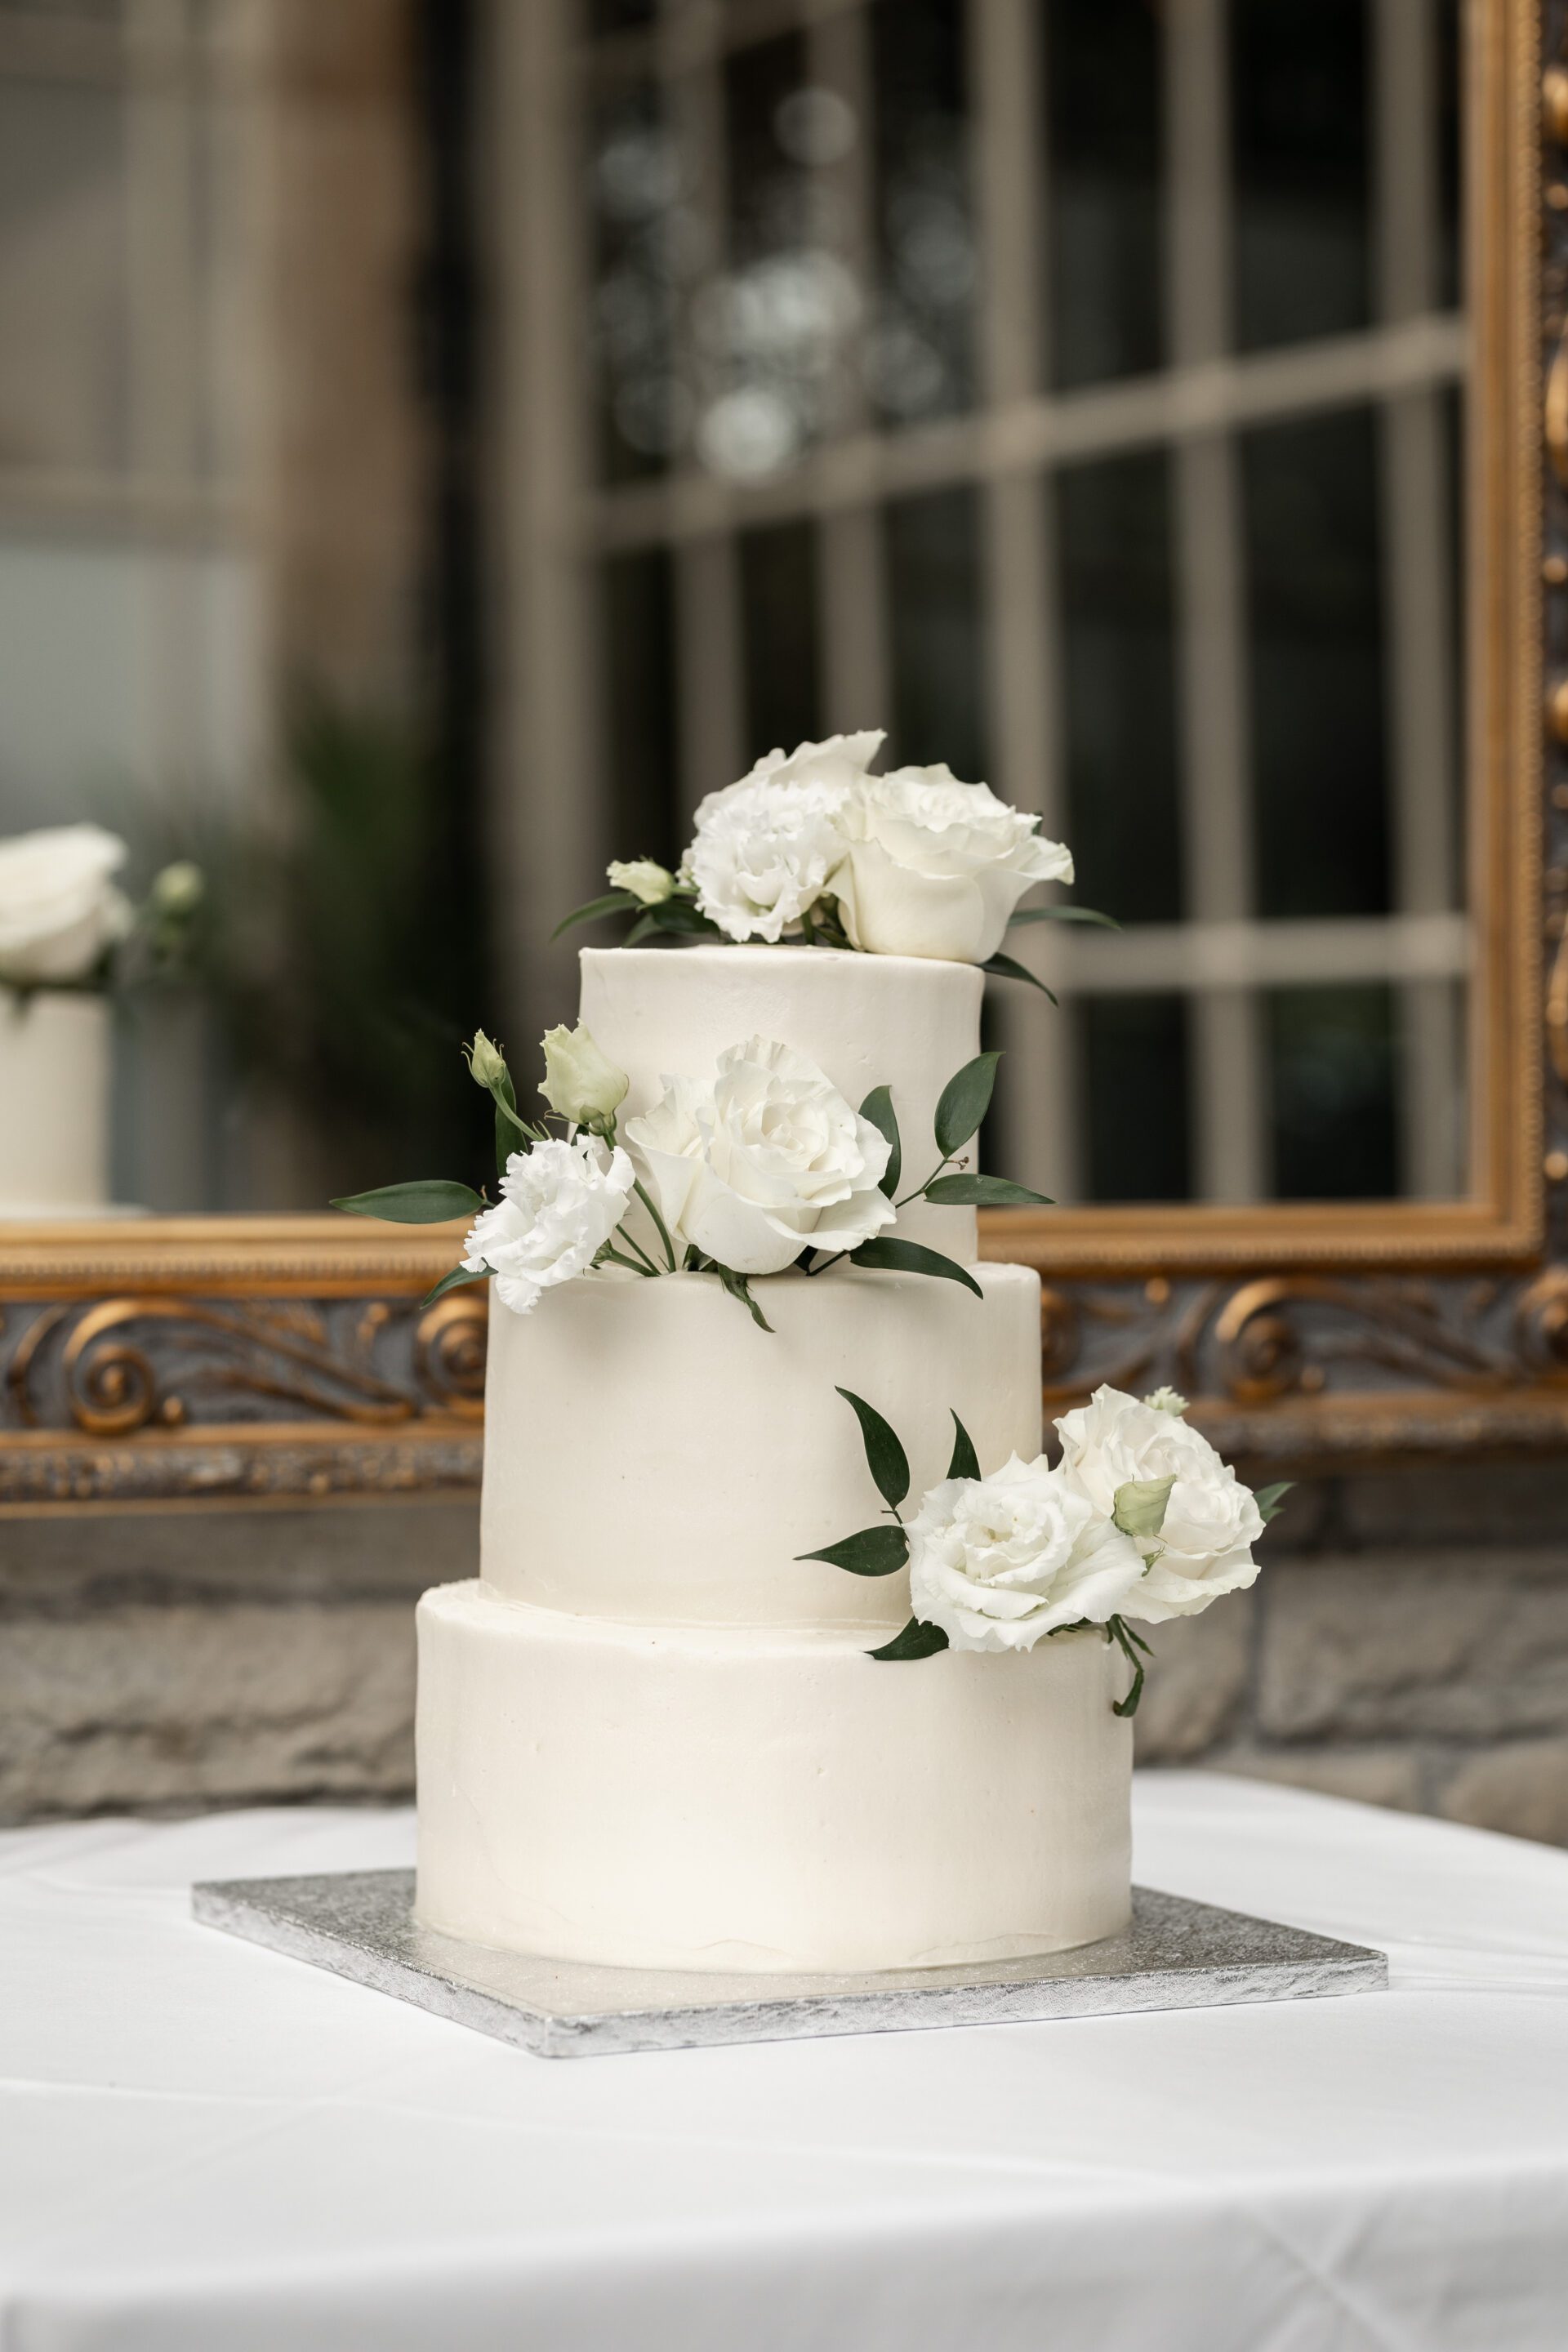 Wedding cake set up in the Orangery at Tortworth court